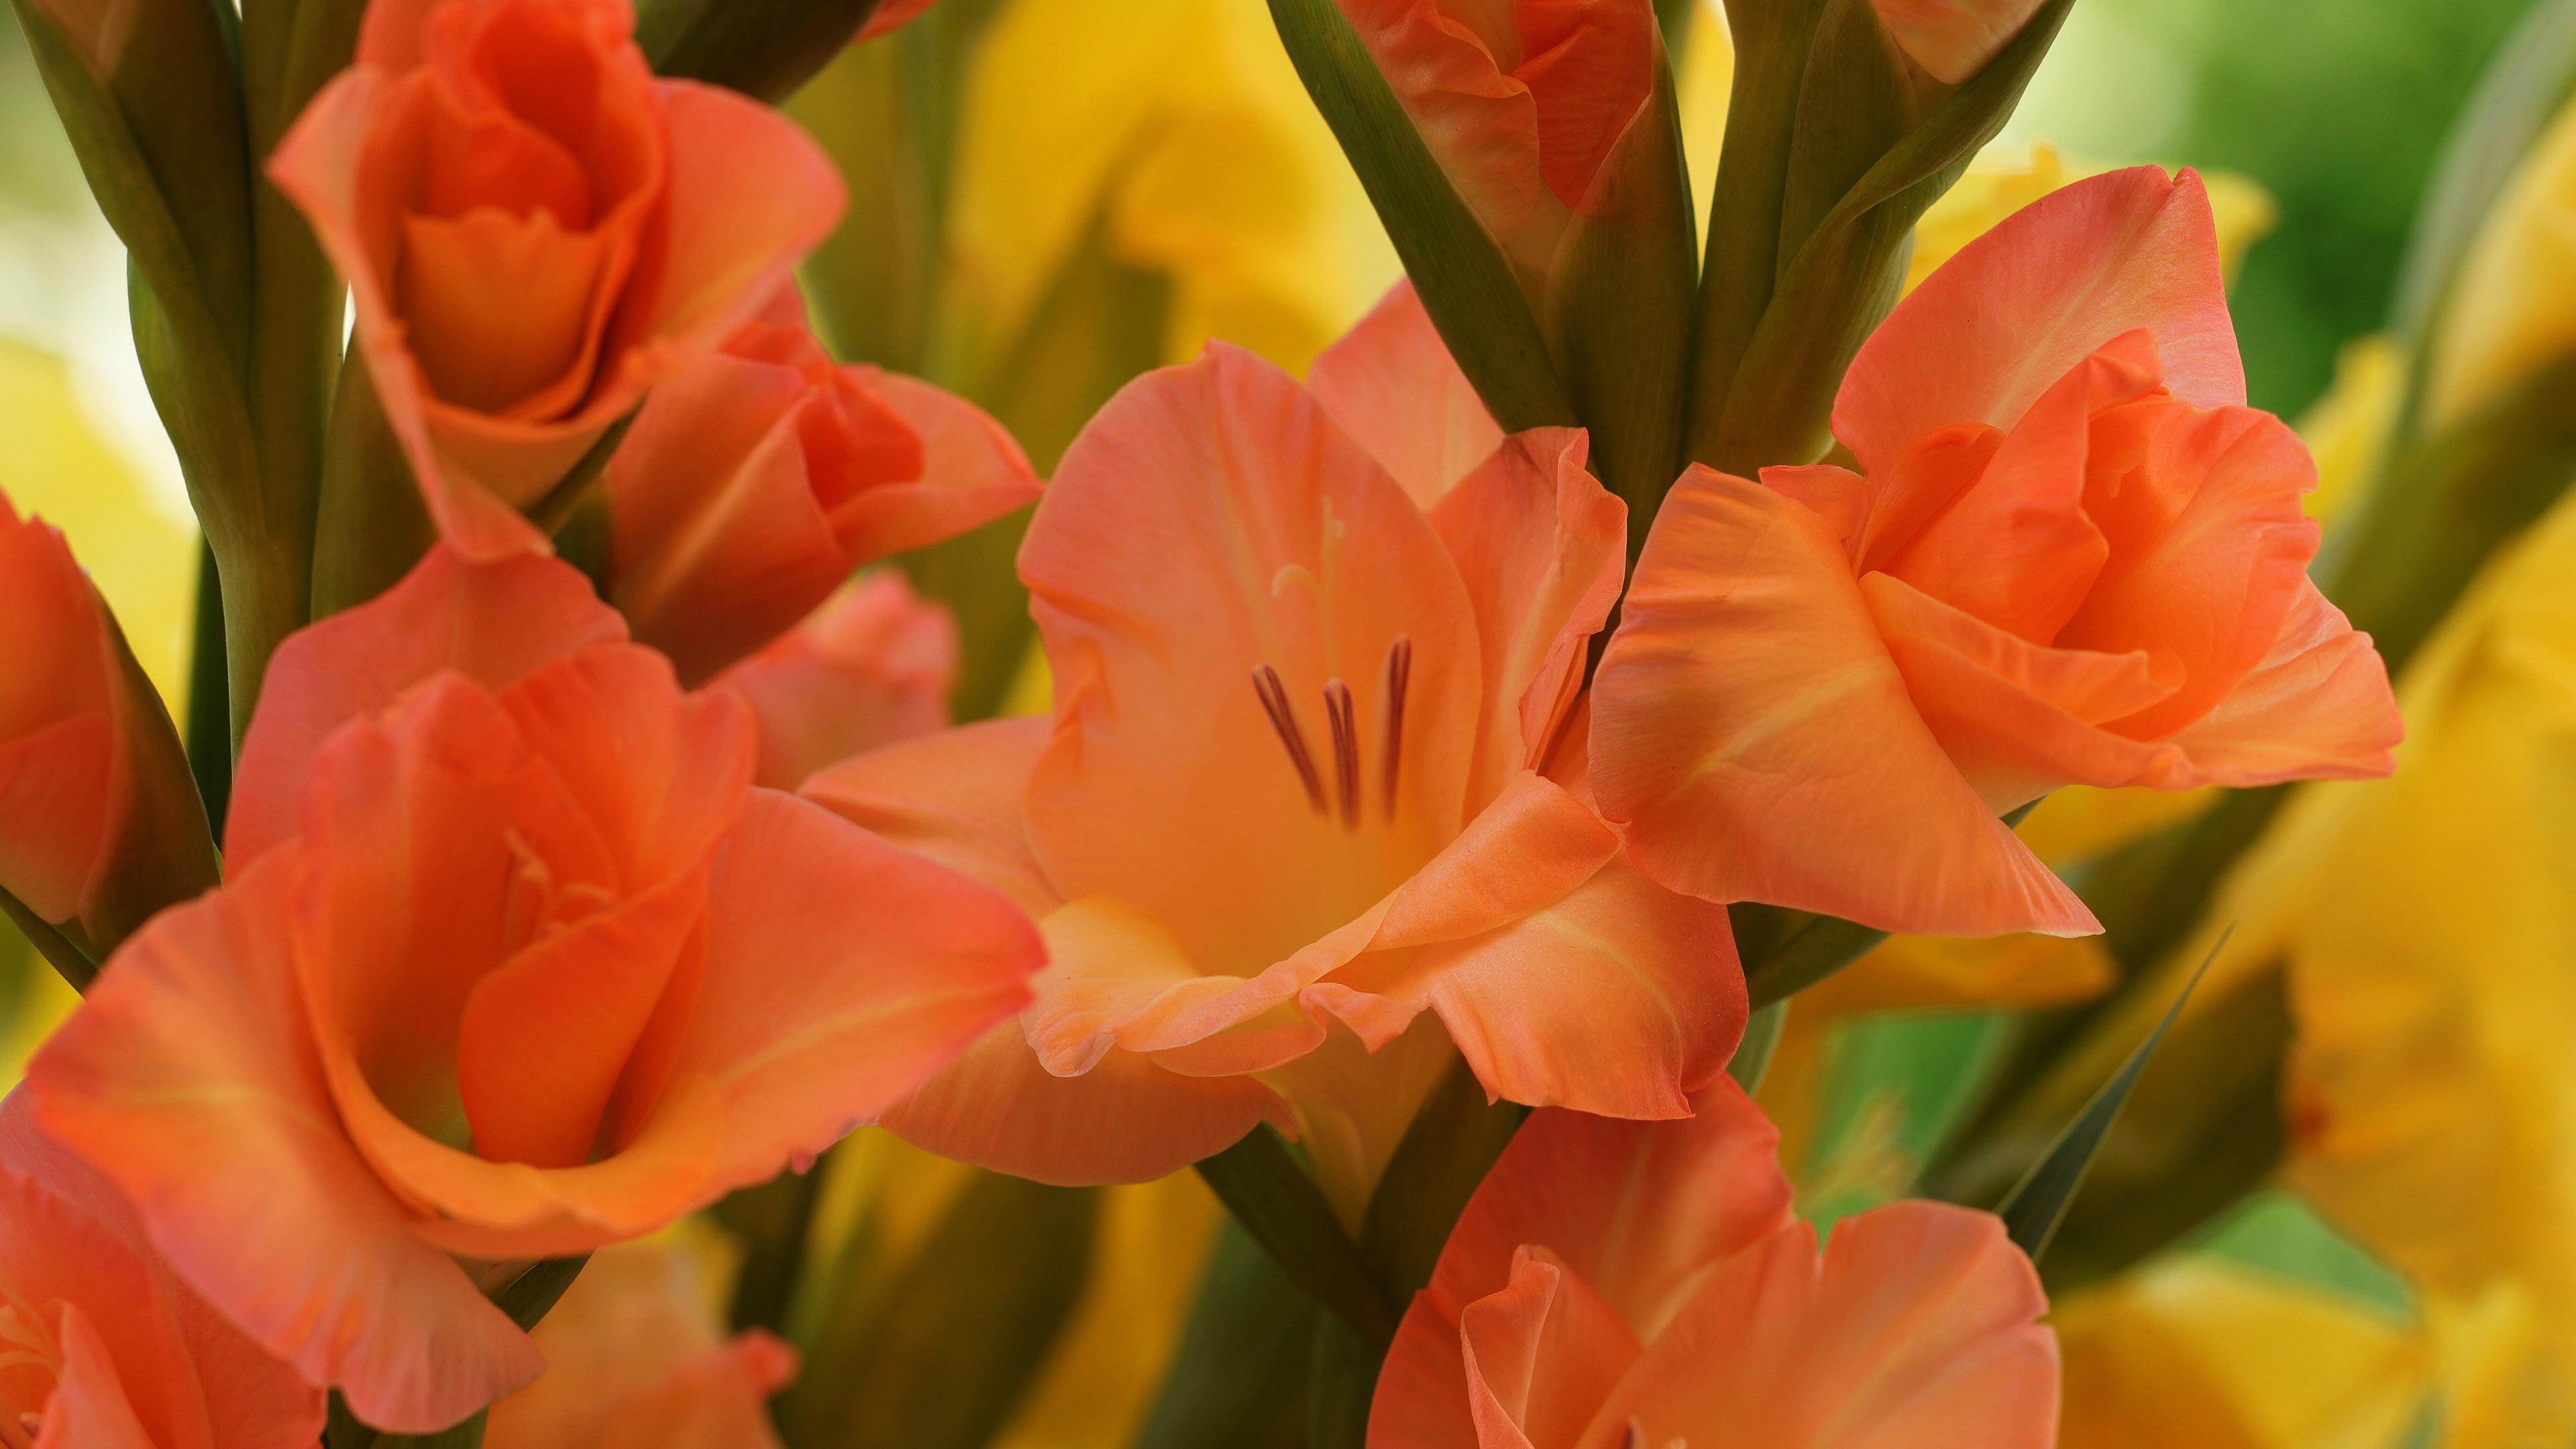 earth, gladiolus, flowers iphone wallpaper